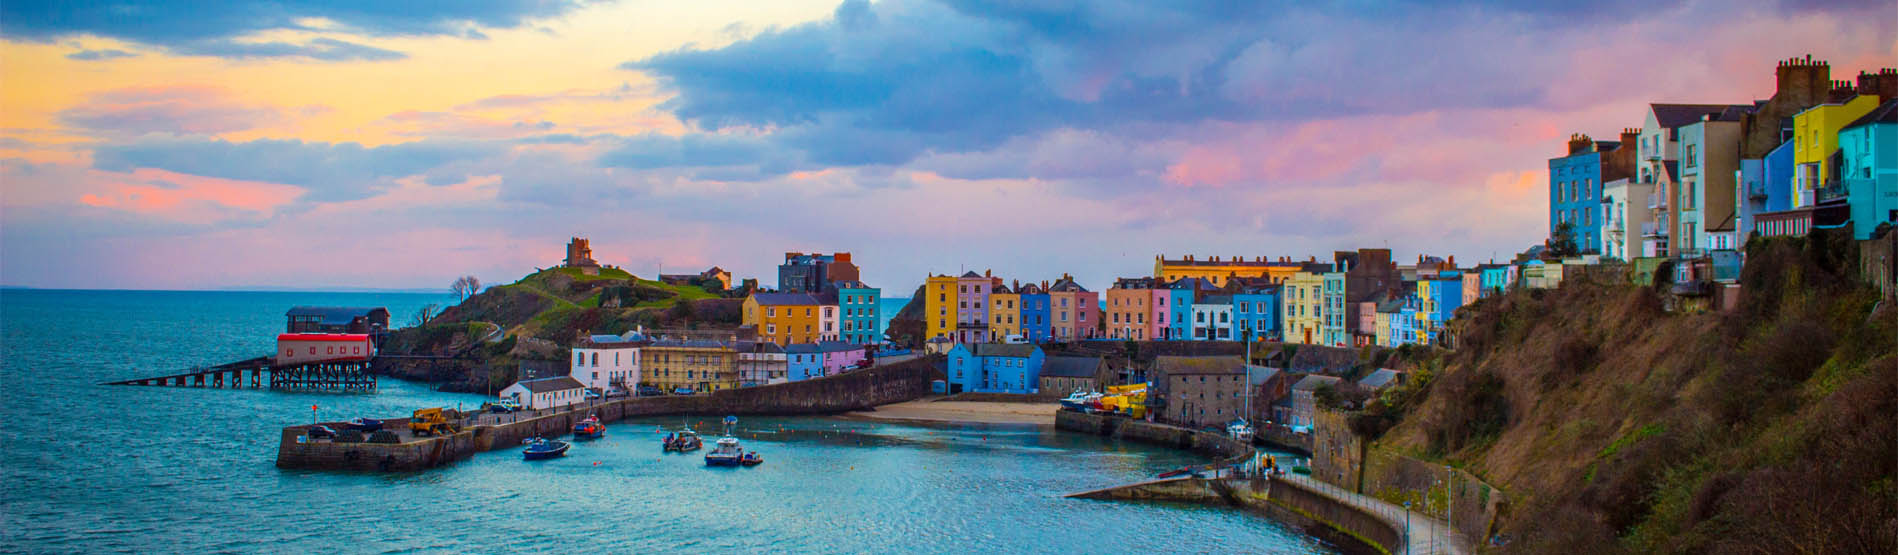 An image of Tenby, West Wales